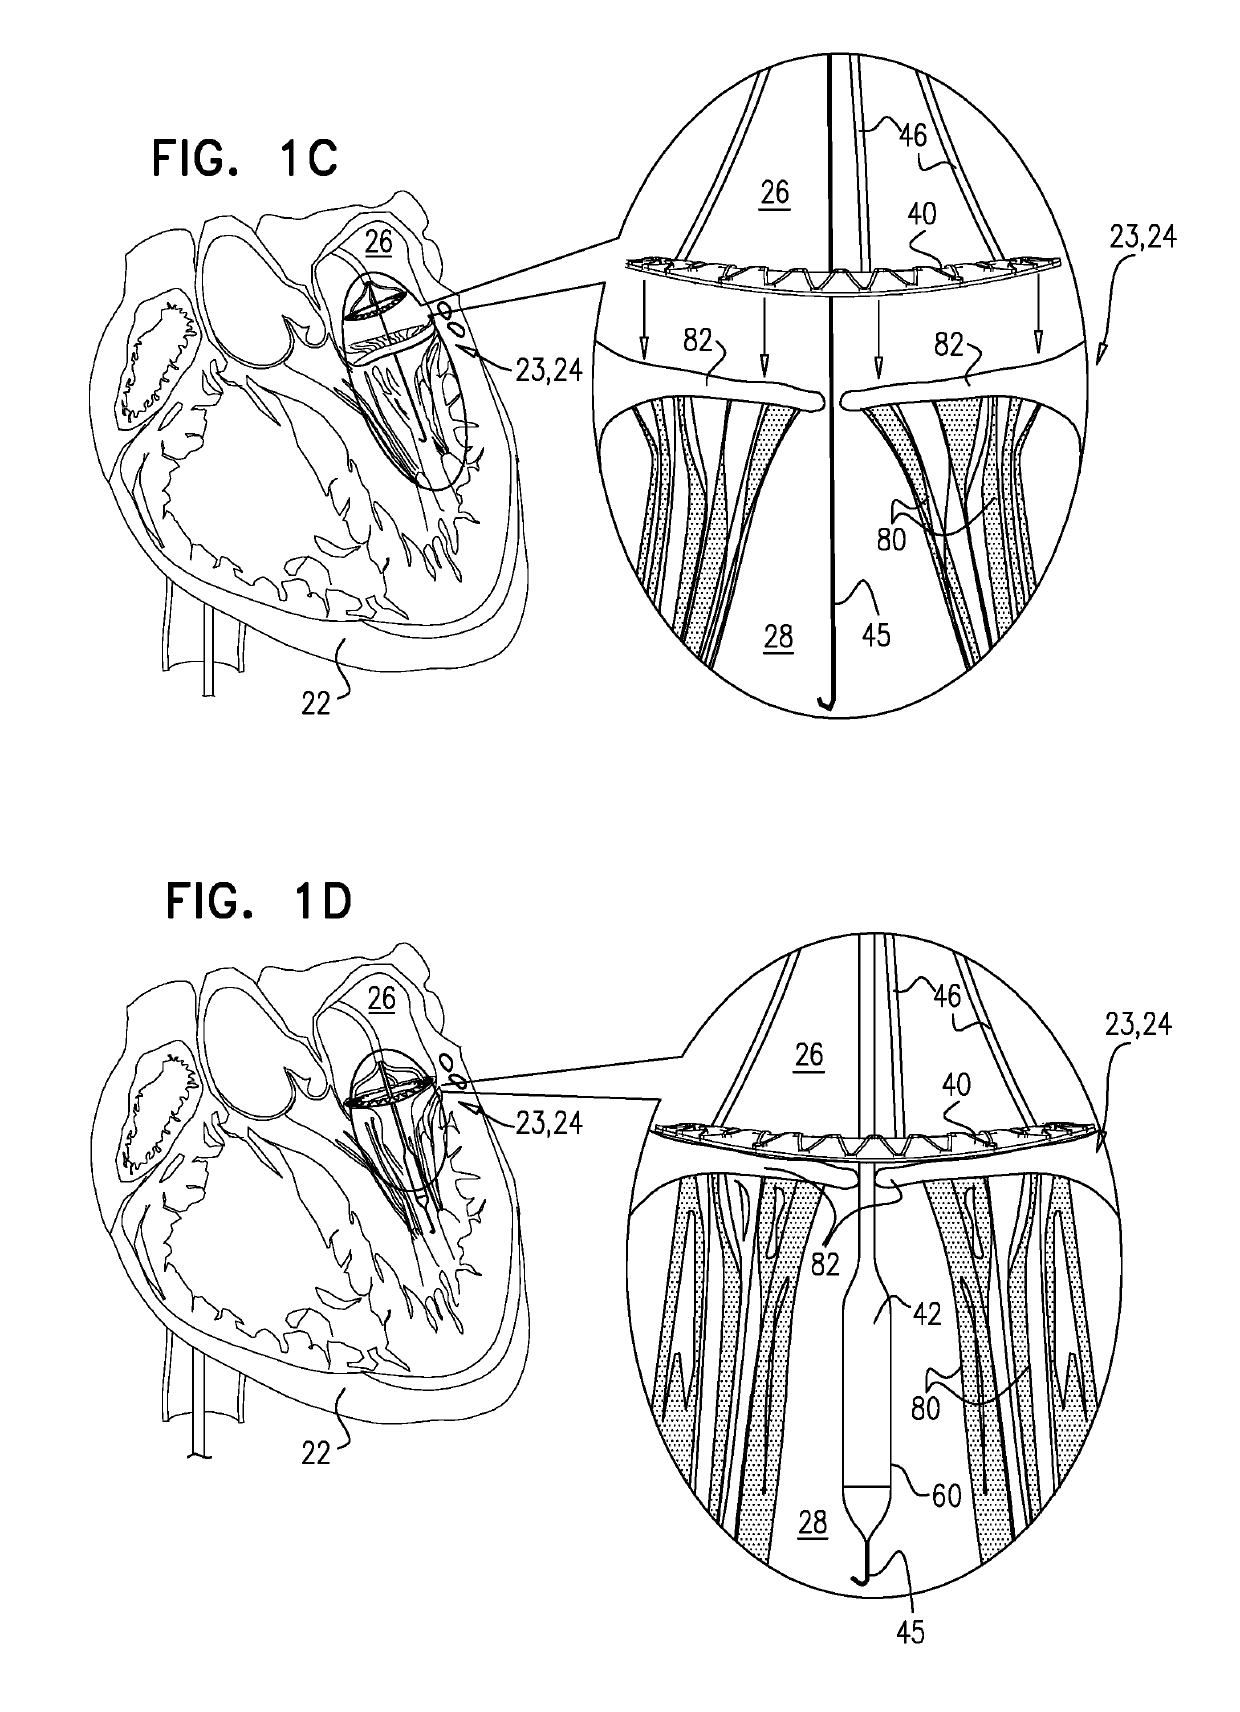 Techniques for percutaneous mitral valve replacement and sealing